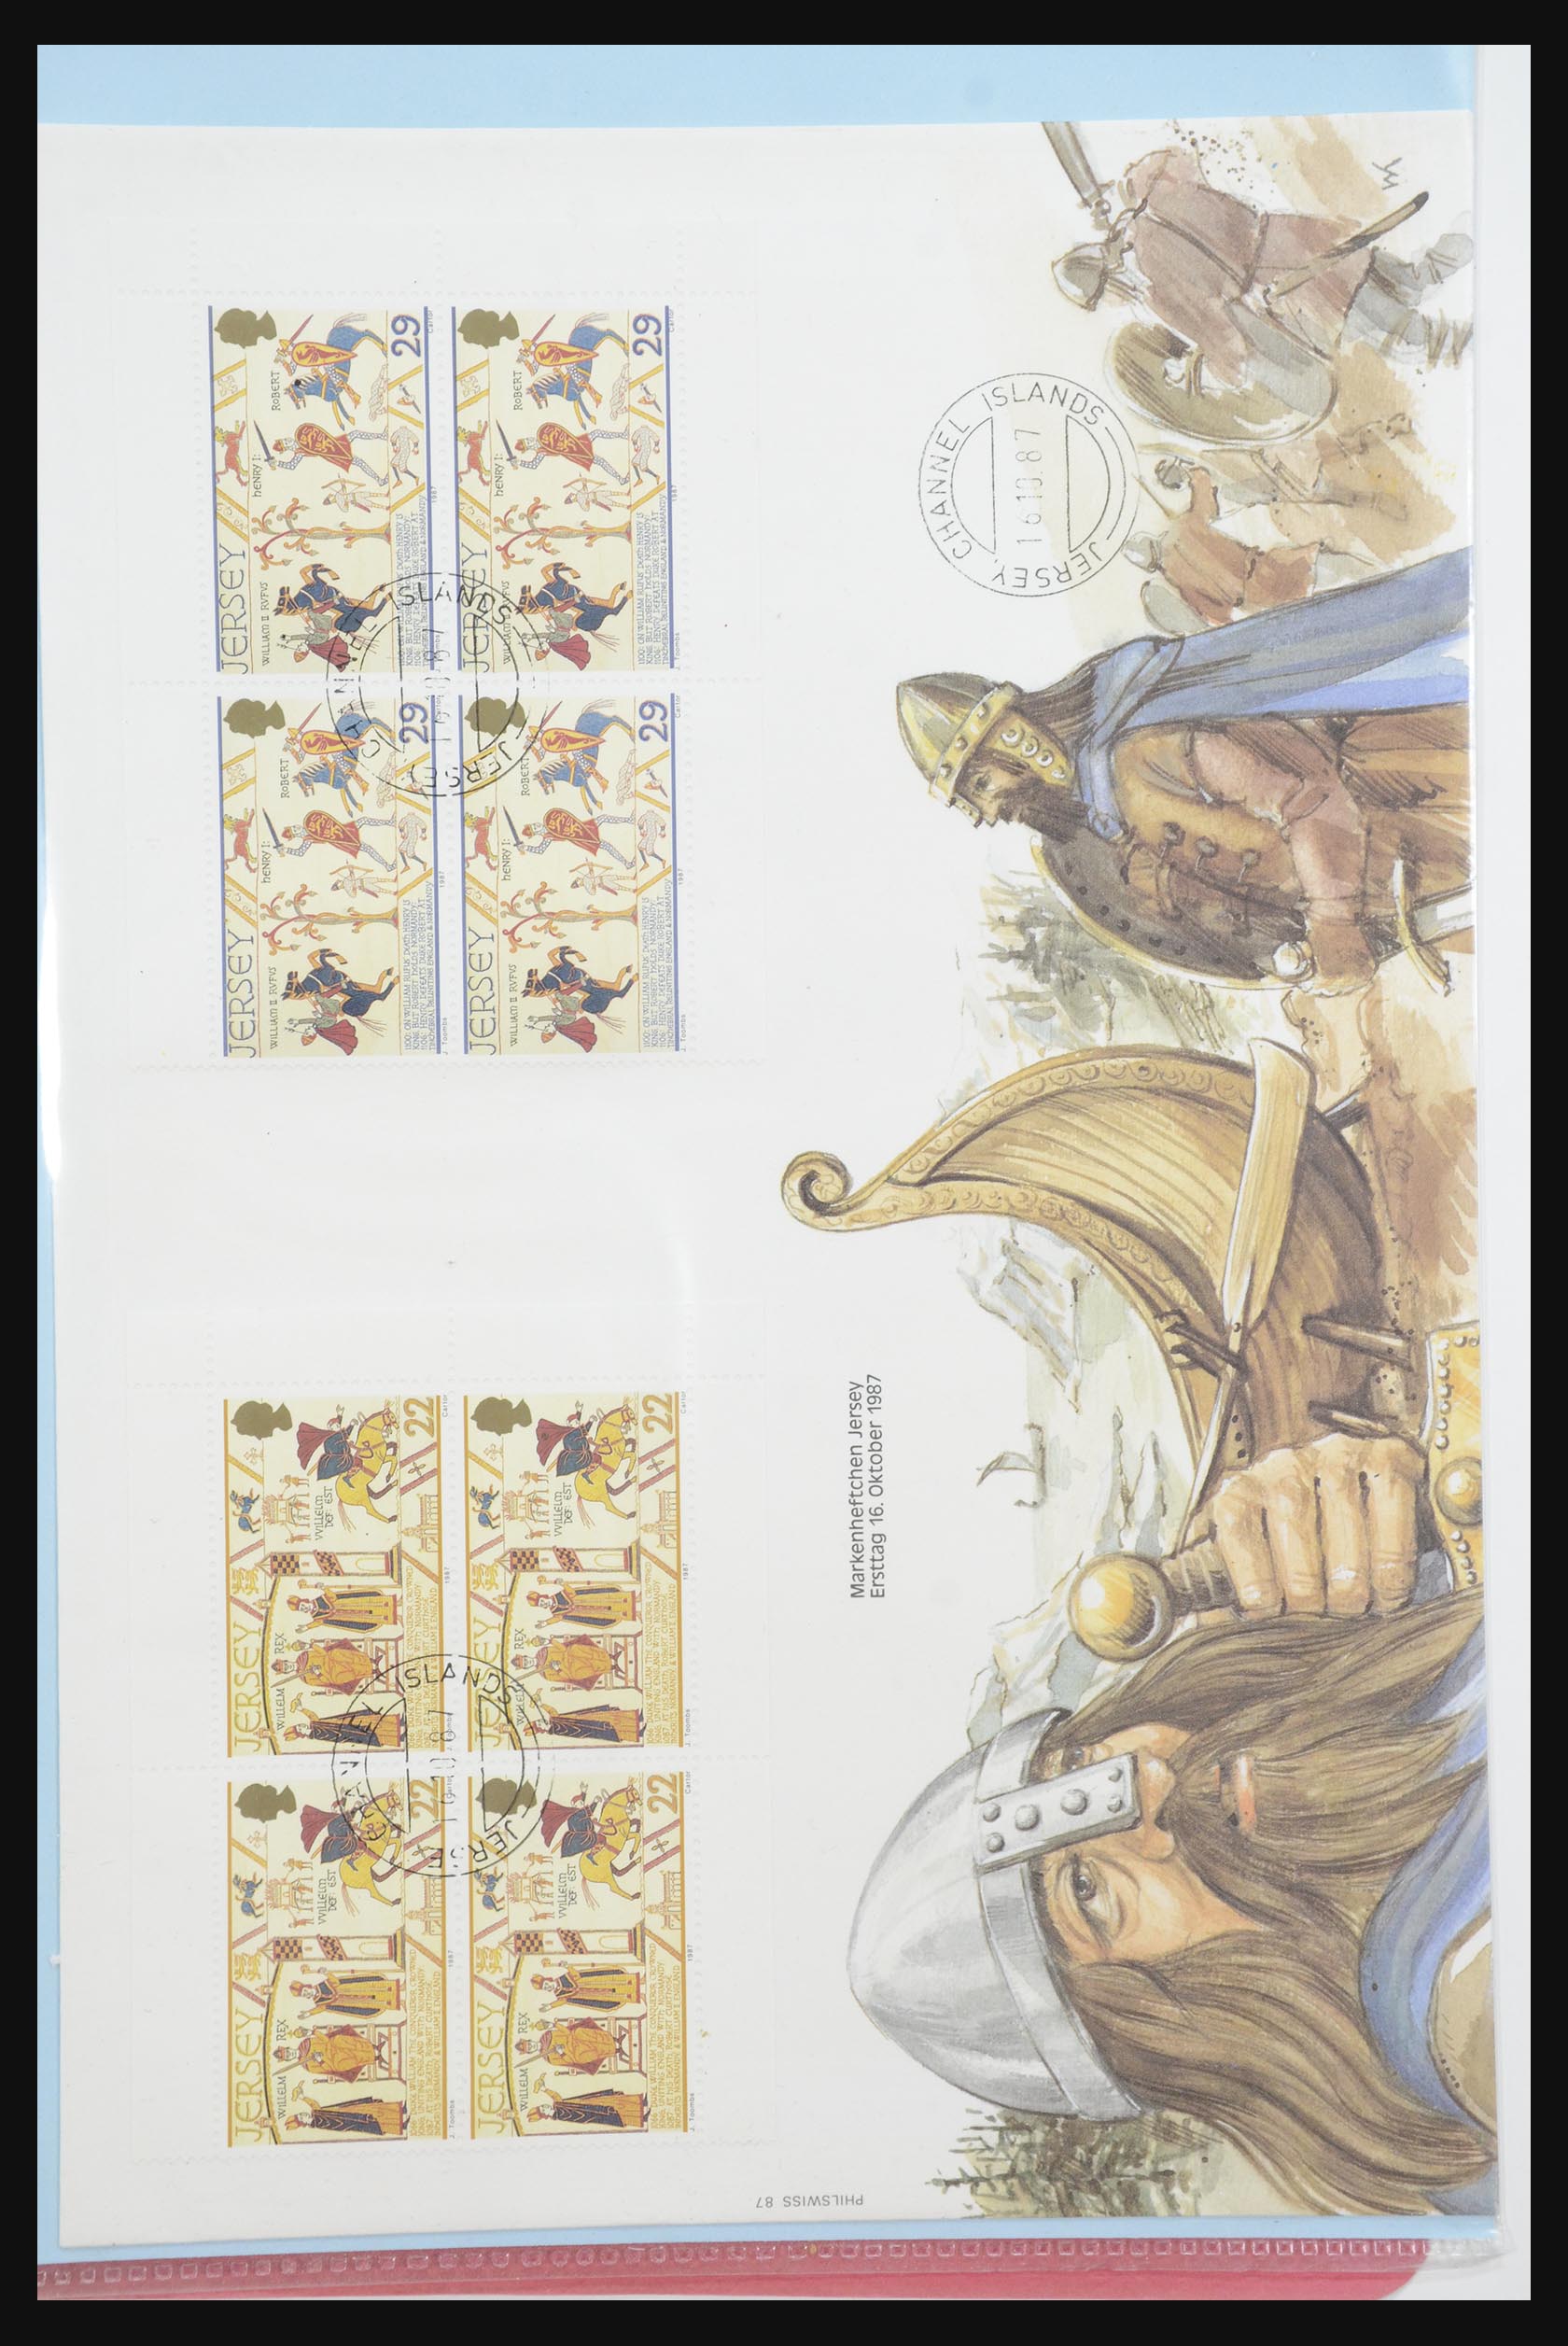 31915 084 - 31915 Western Europe souvenir sheets and stamp booklets on FDC.